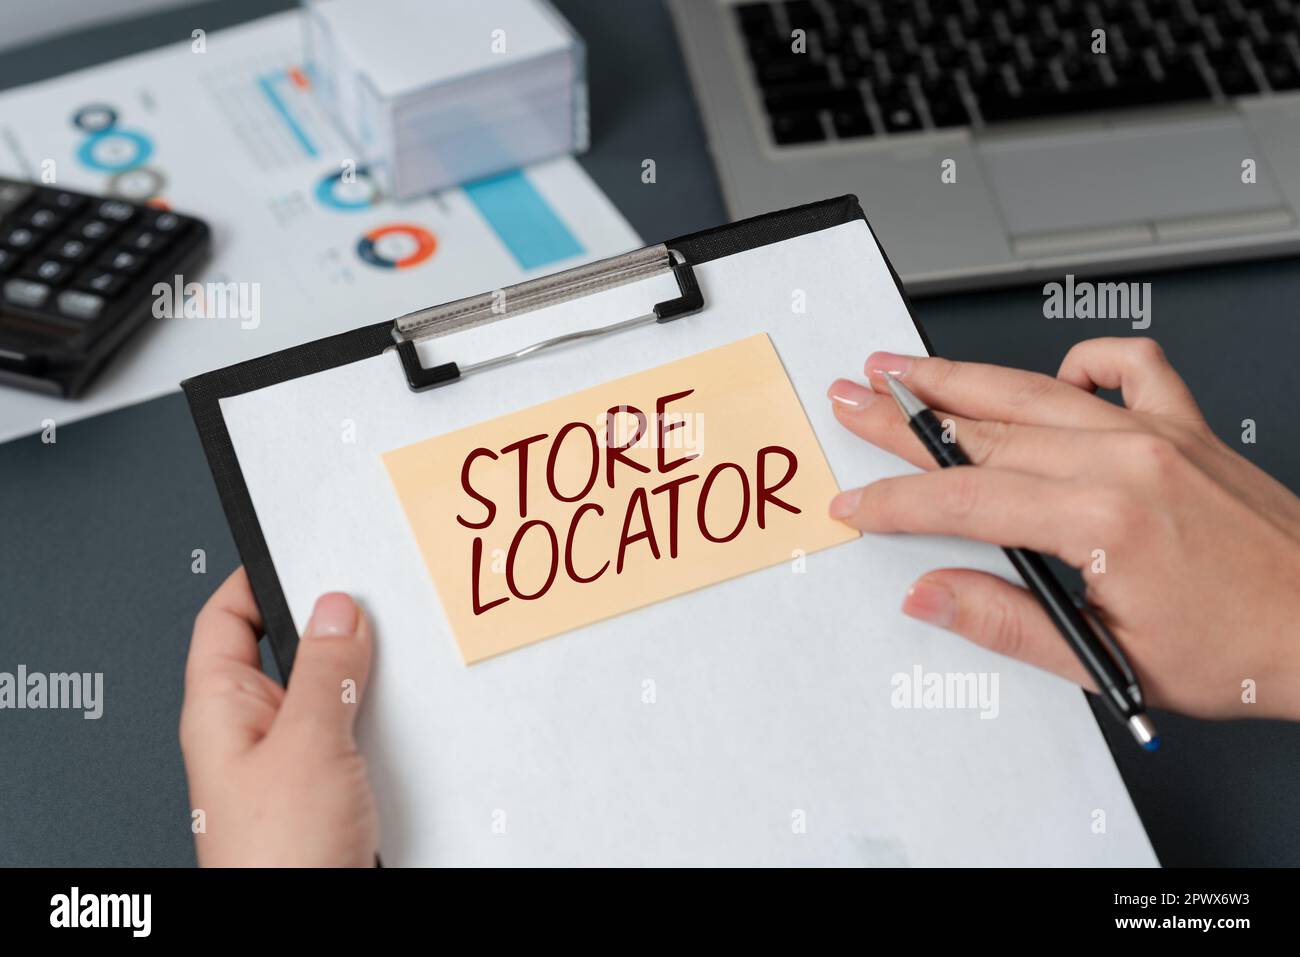 Text sign showing Store Locator, Concept meaning to know the address contact number and operating hours Stock Photo